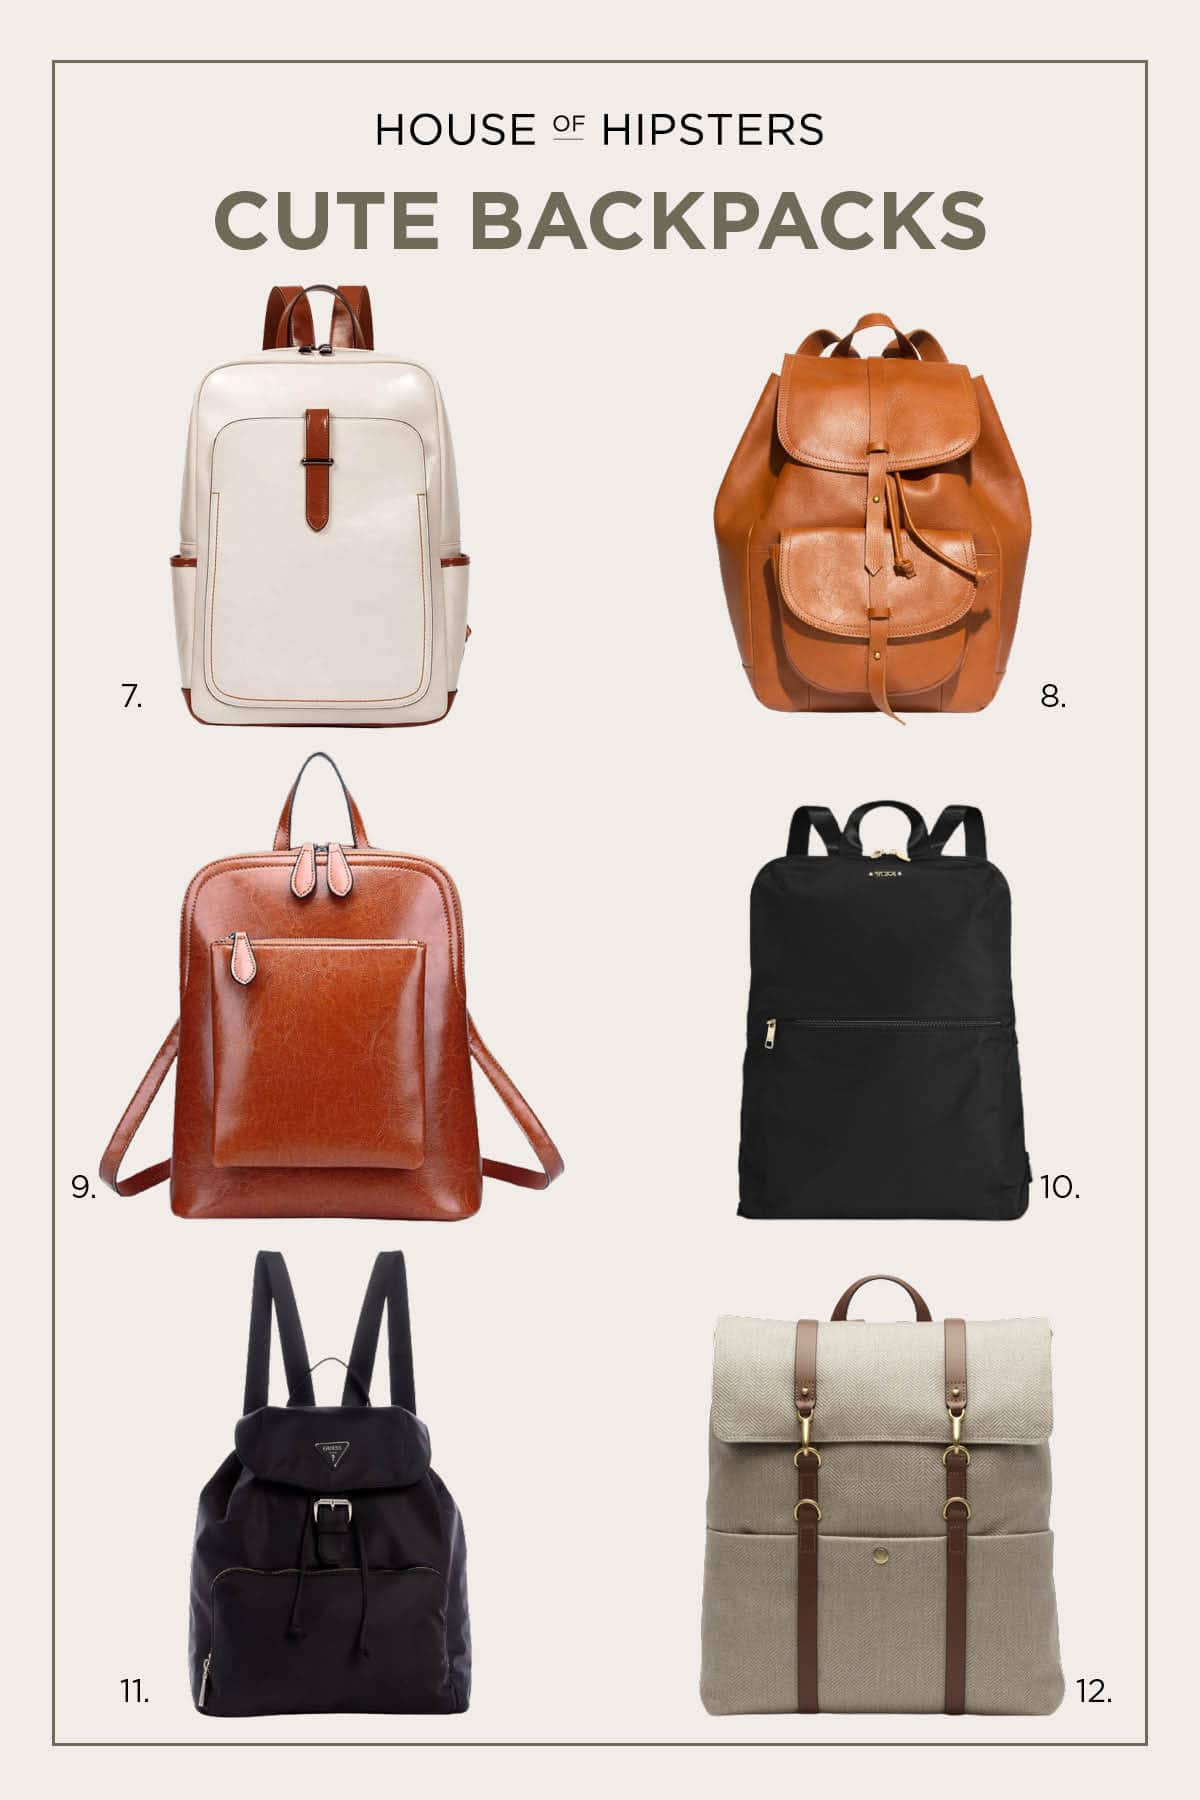 12 Cute Backpacks for work, school, and travel - plus most fit a laptop!